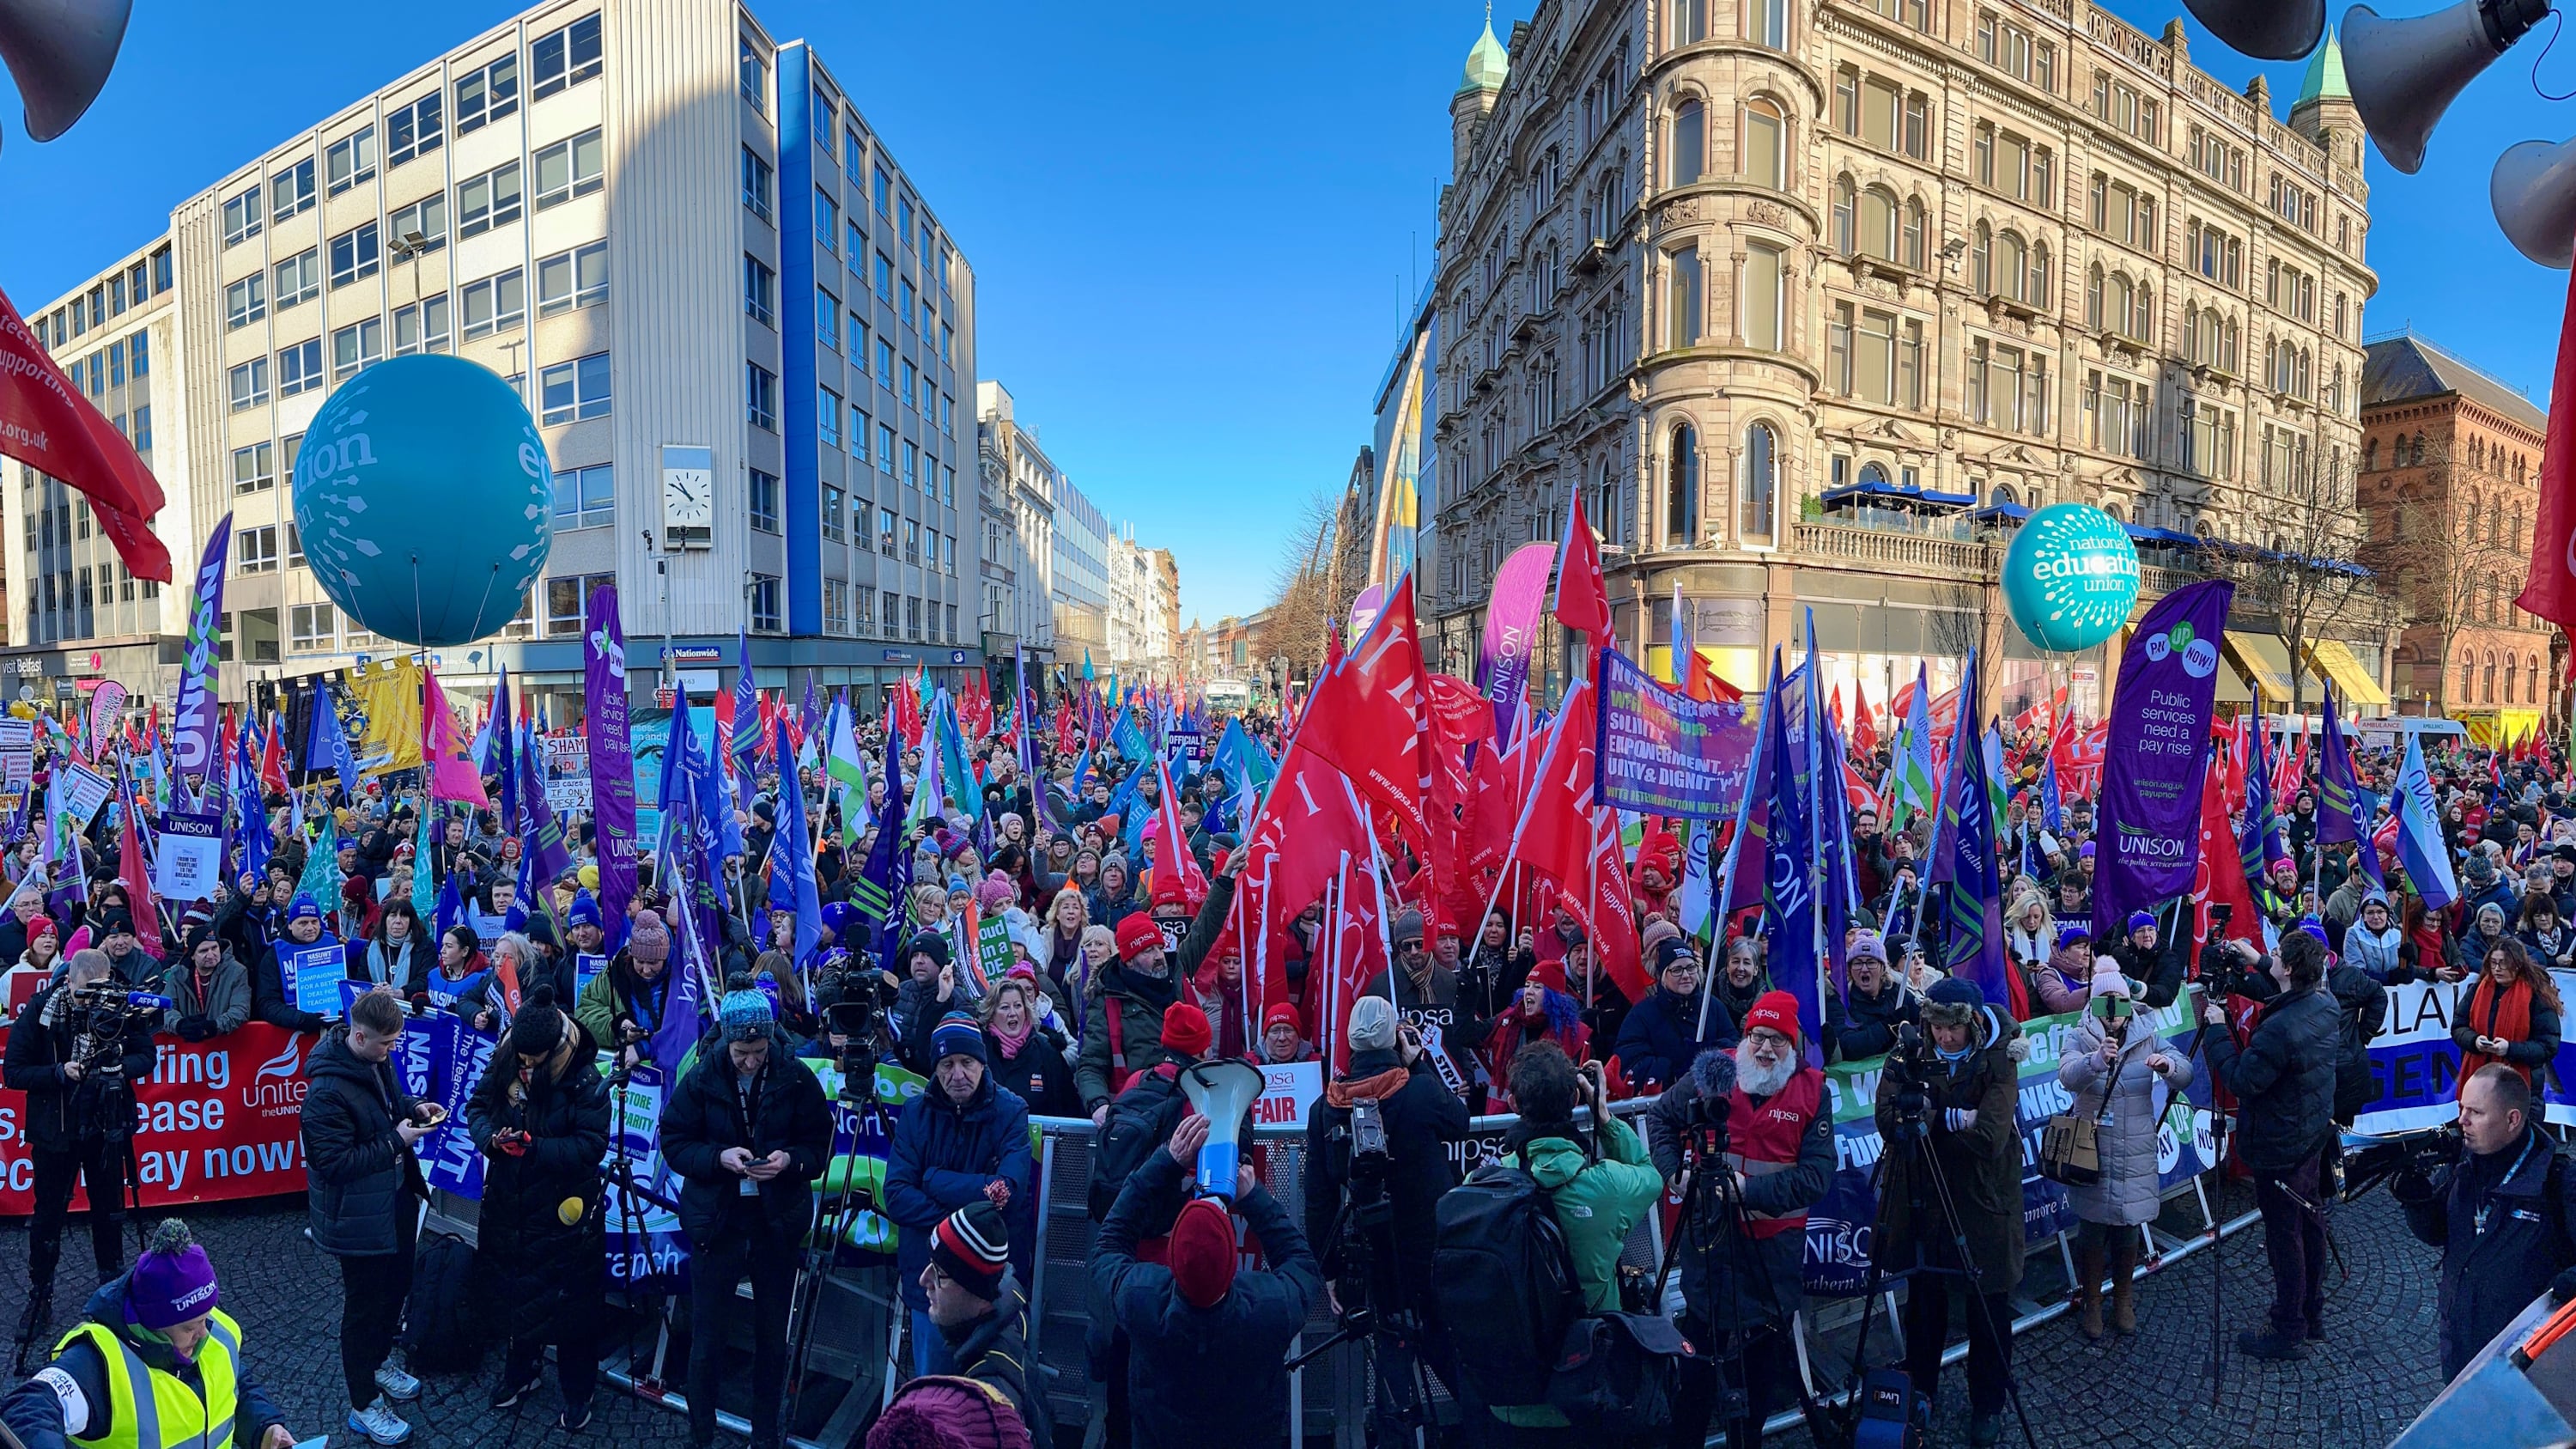 The unions made the call after an estimated 170,000 public sector workers last week took part in a strike over pay